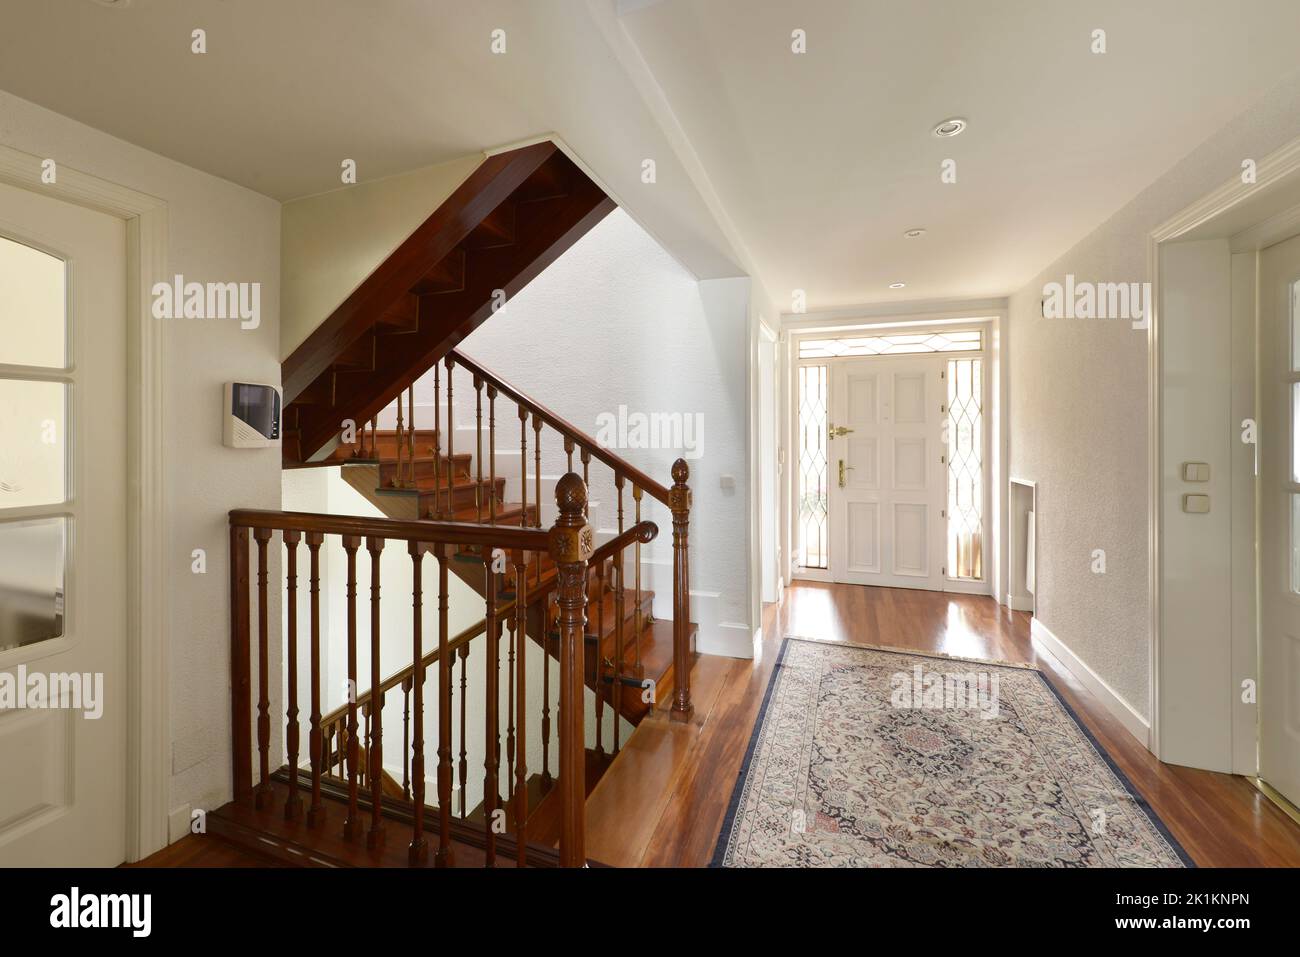 Hall of a single-family home entrance door with distribution wooden stairs to the different levels Stock Photo